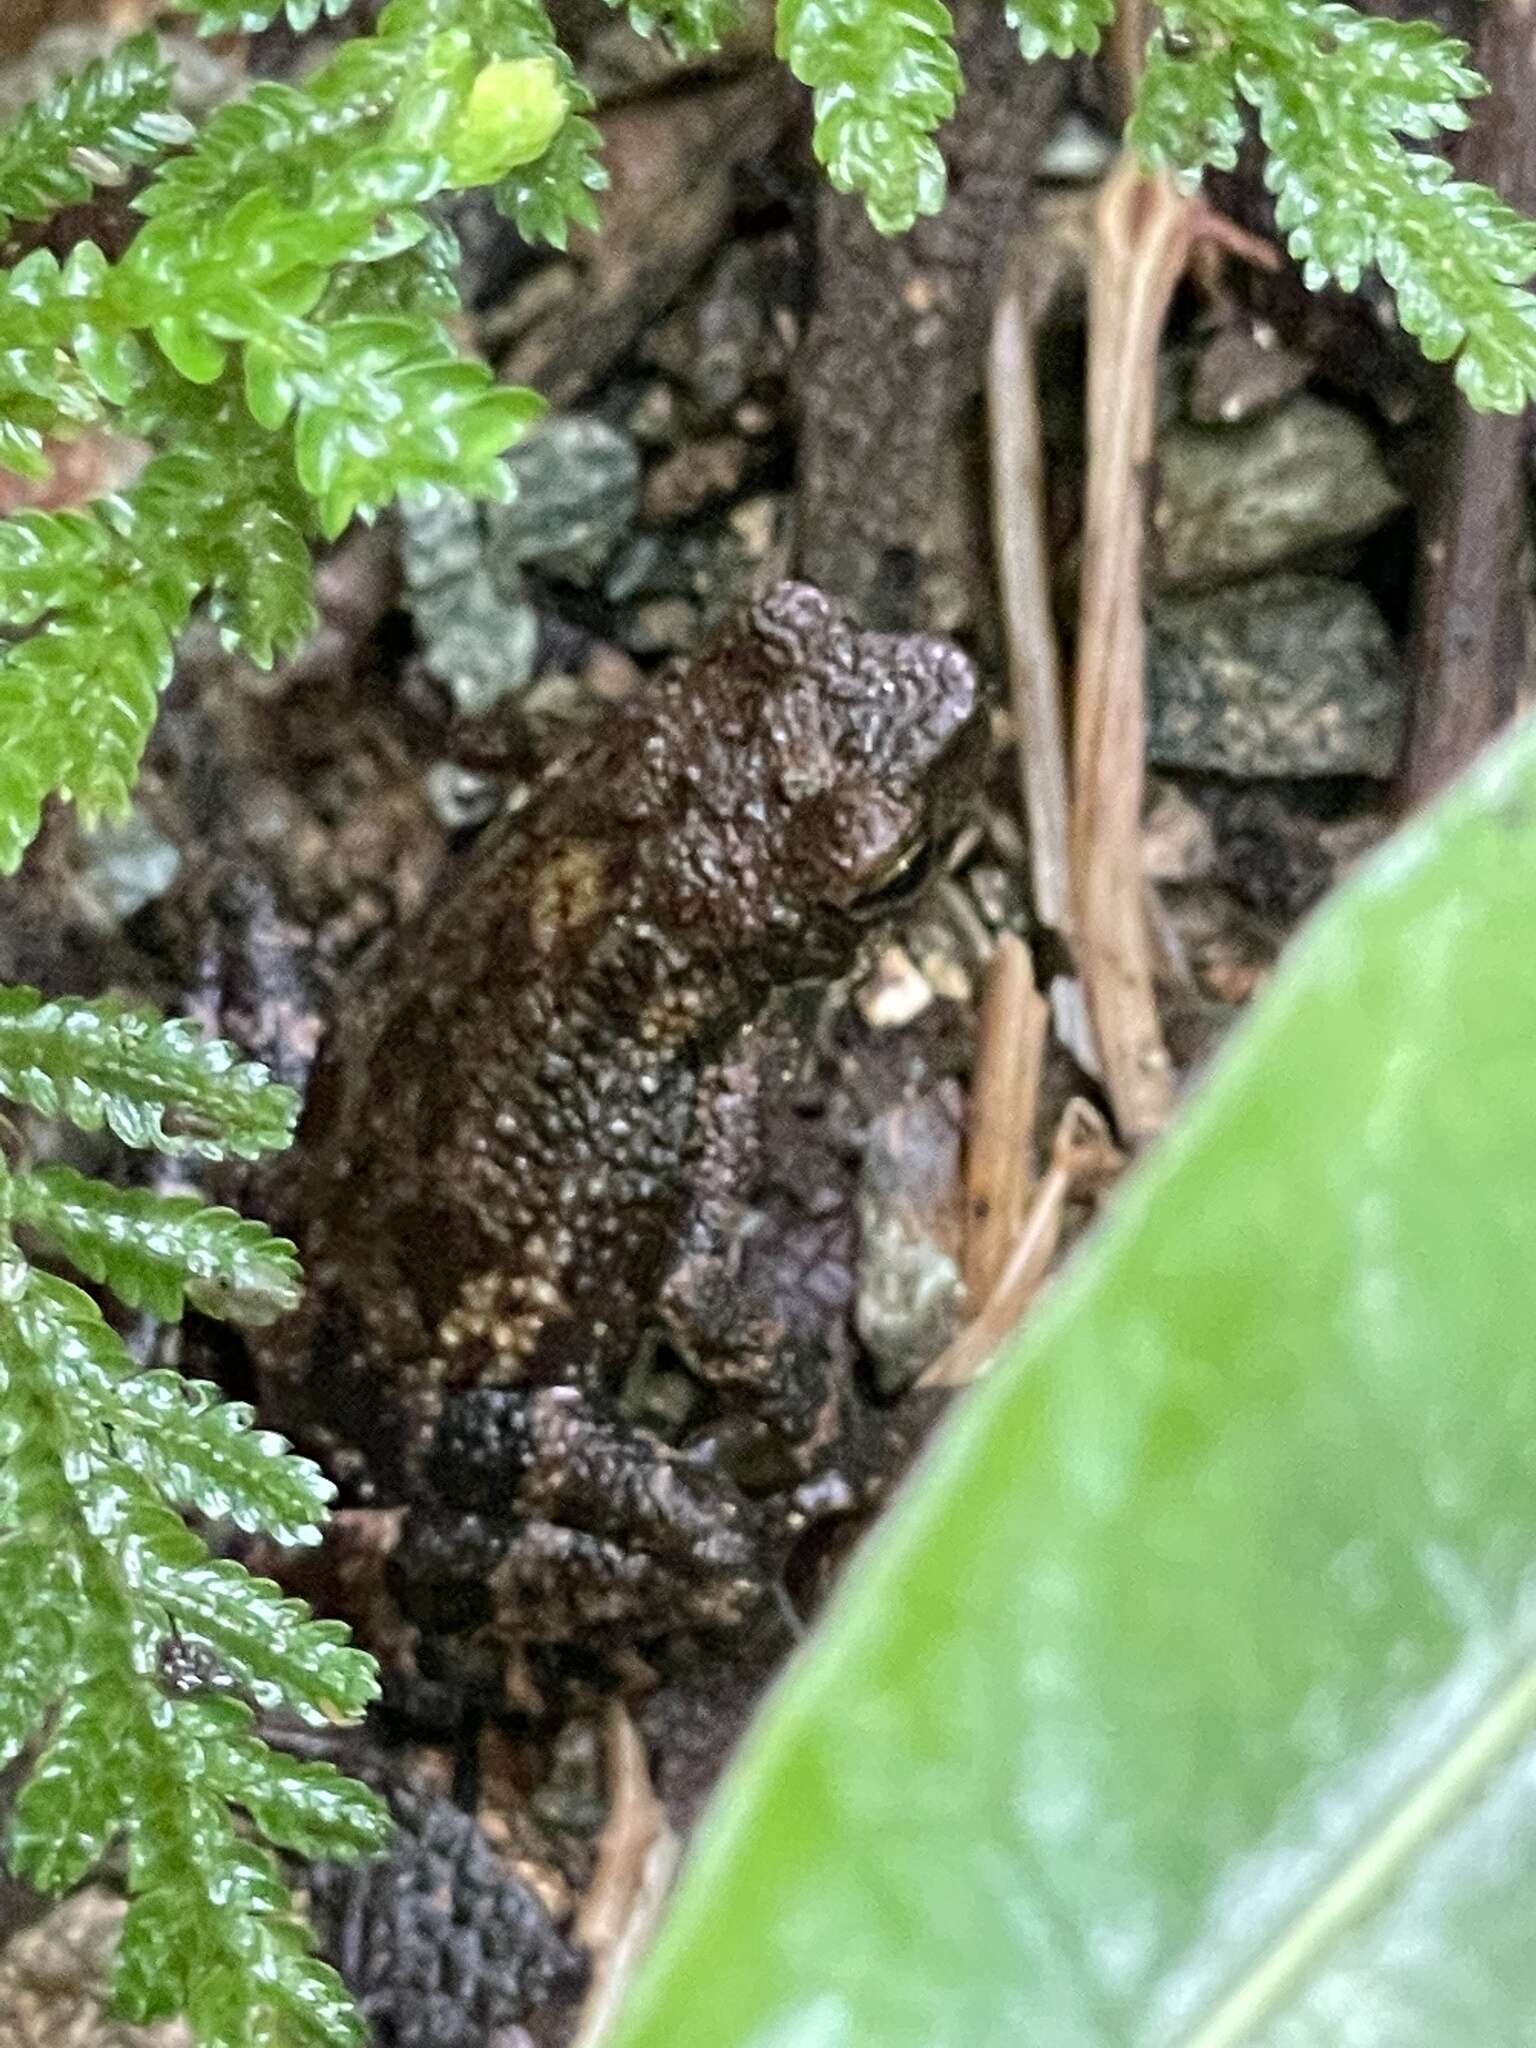 Image of Muller's toad